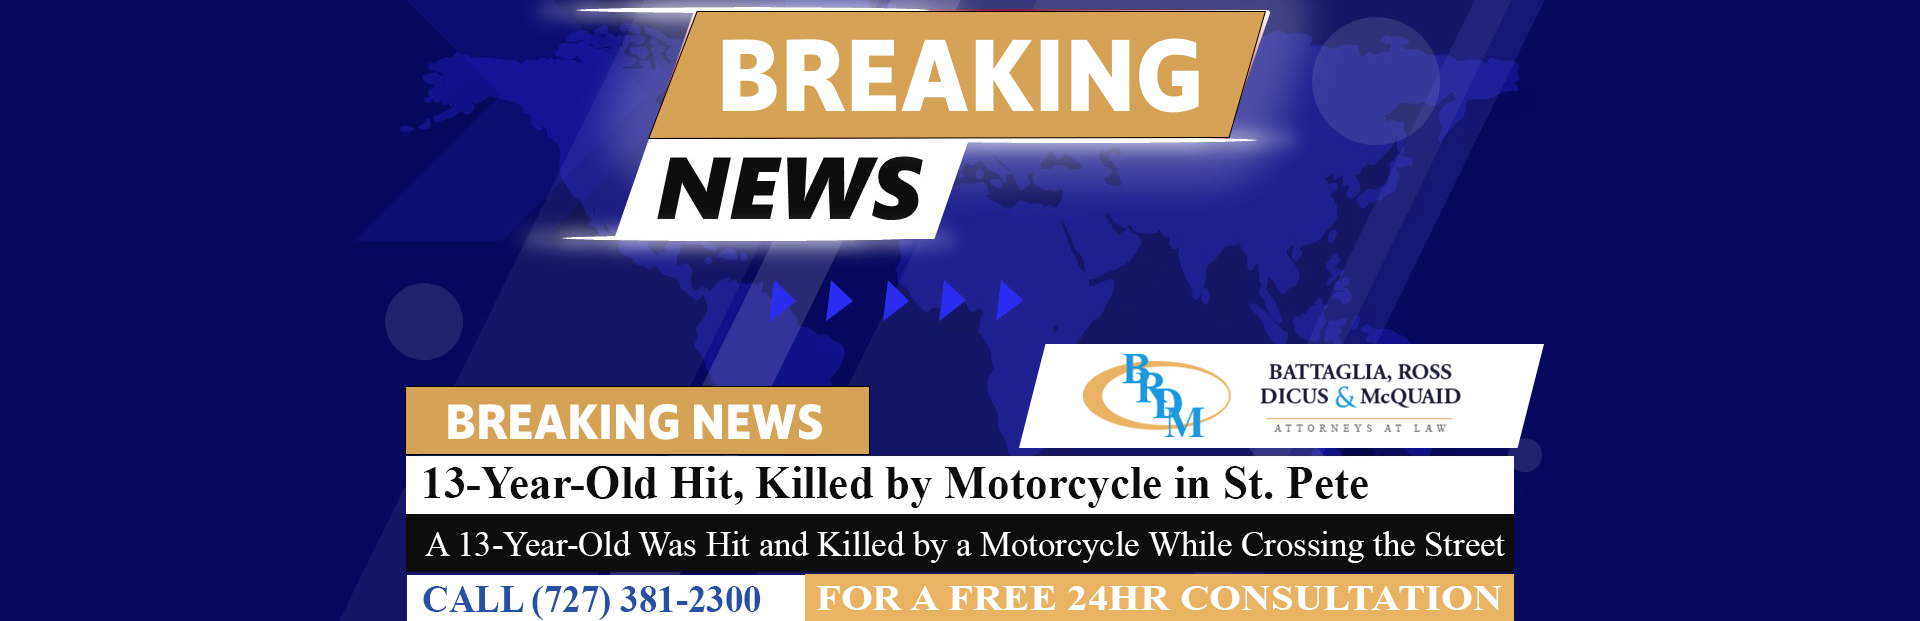 [01-31-23] 13-Year-Old Hit, Killed by Motorcycle While Crossing Street in St. Pete